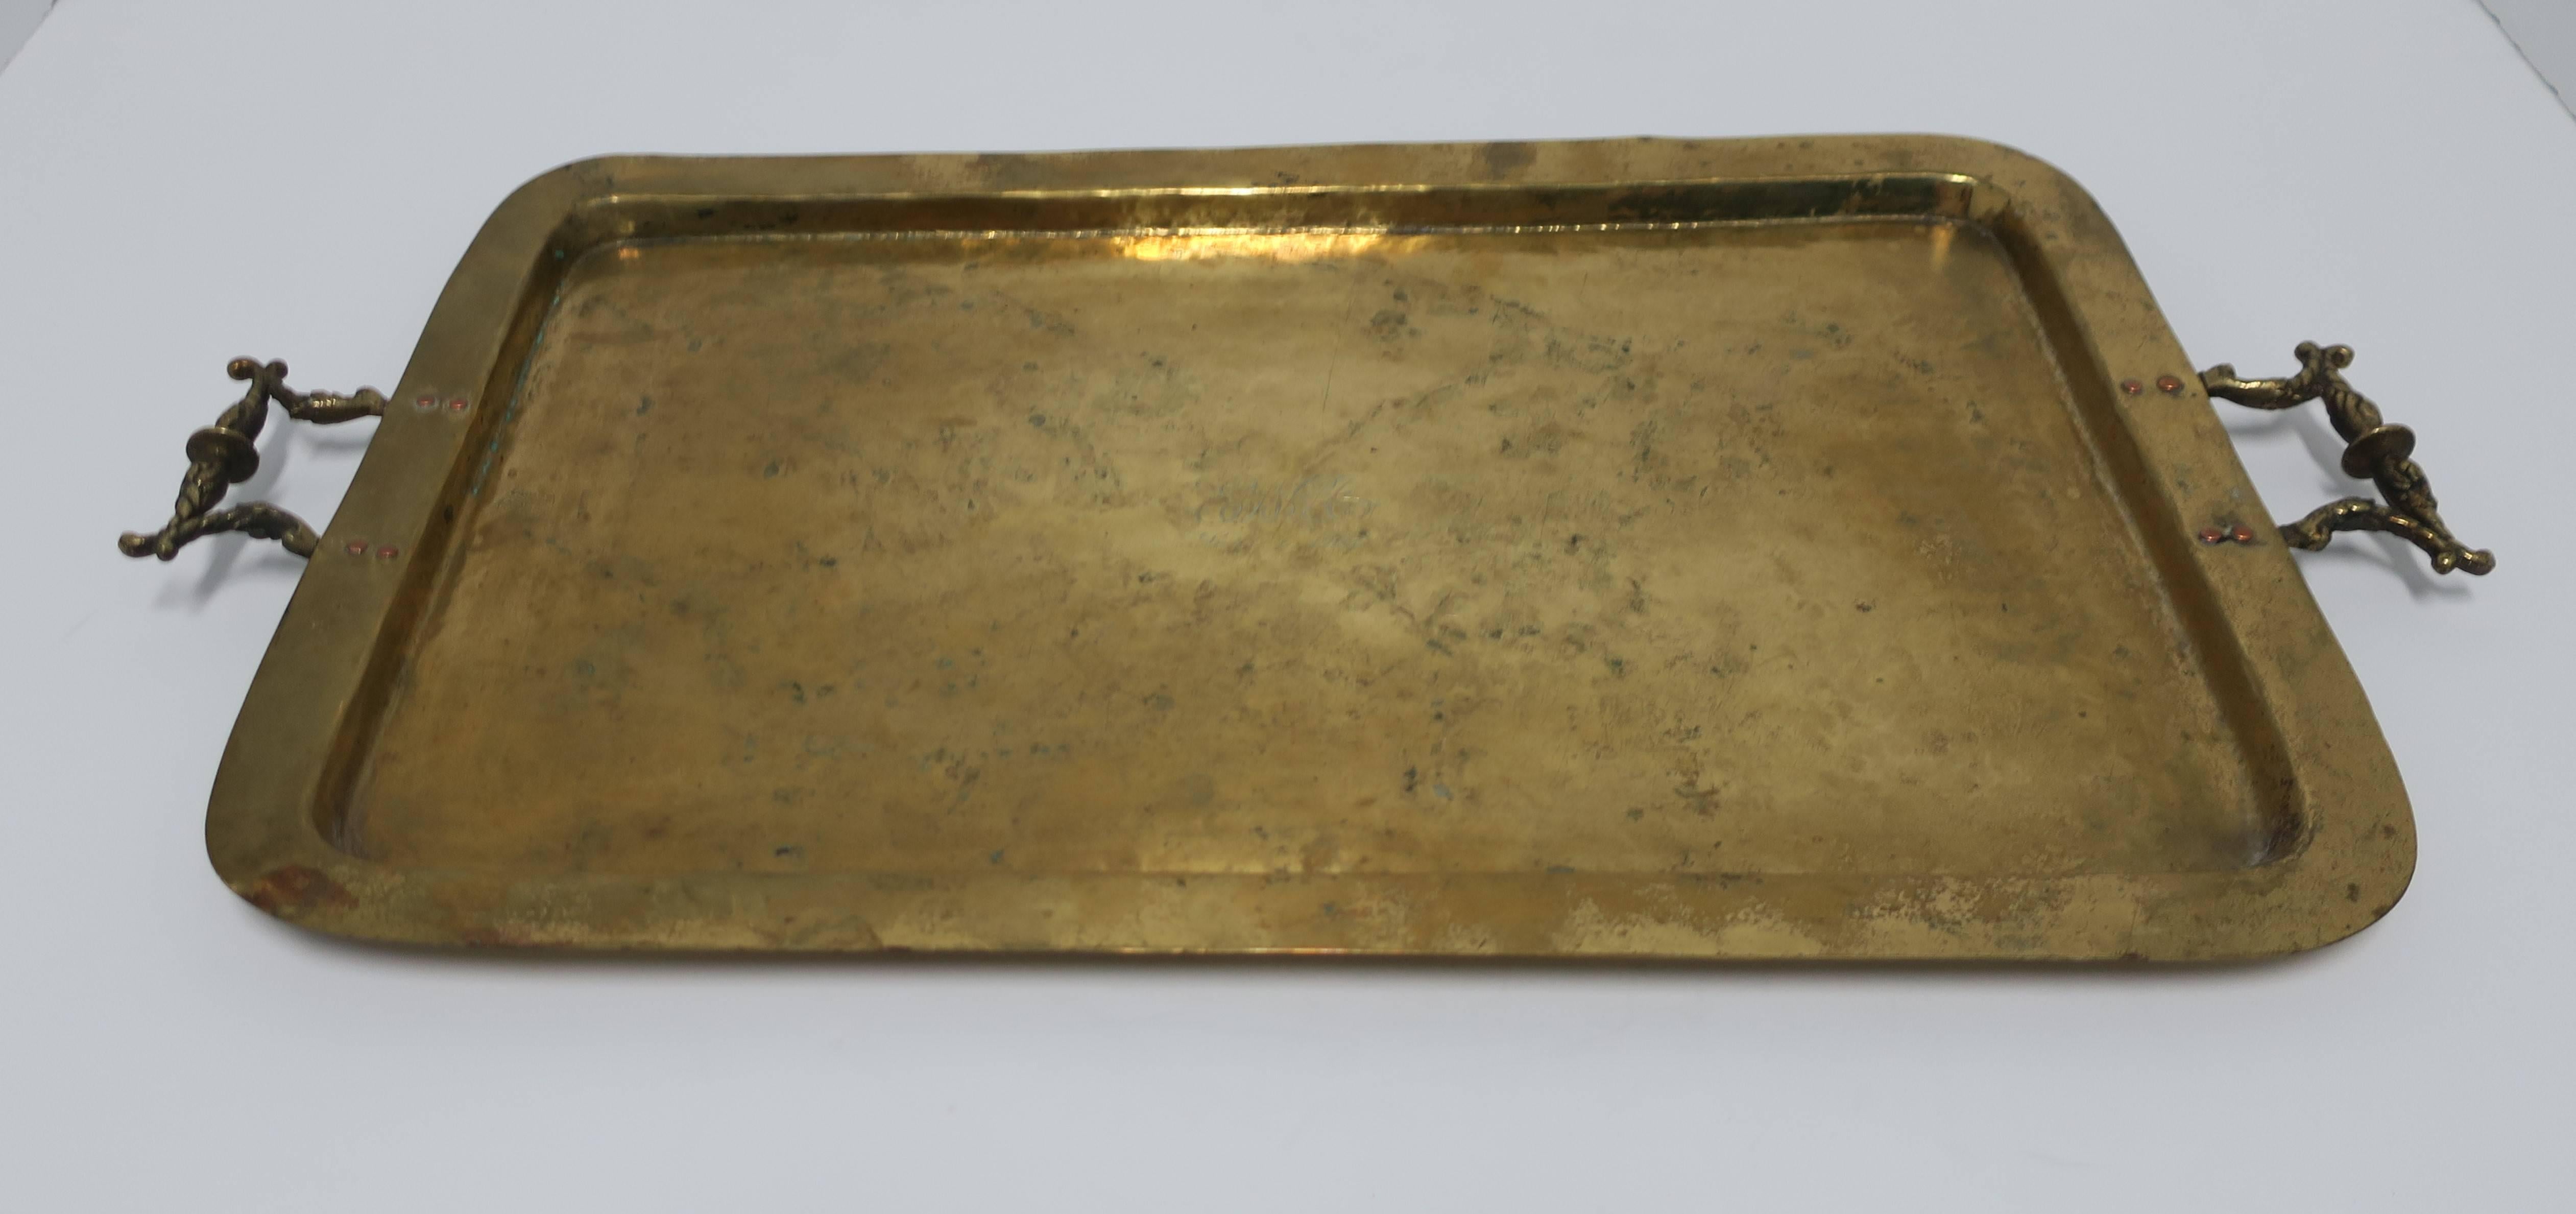 A beautiful antique brass serving tray with decorative handles, circa early 20th century. Tray has small center engraving reading: ENA, Sept. 6, 1907. Tray is embossed with maker's mark as show in image #8. 

Tray measures: 24 in. x 13.5 x .75 in